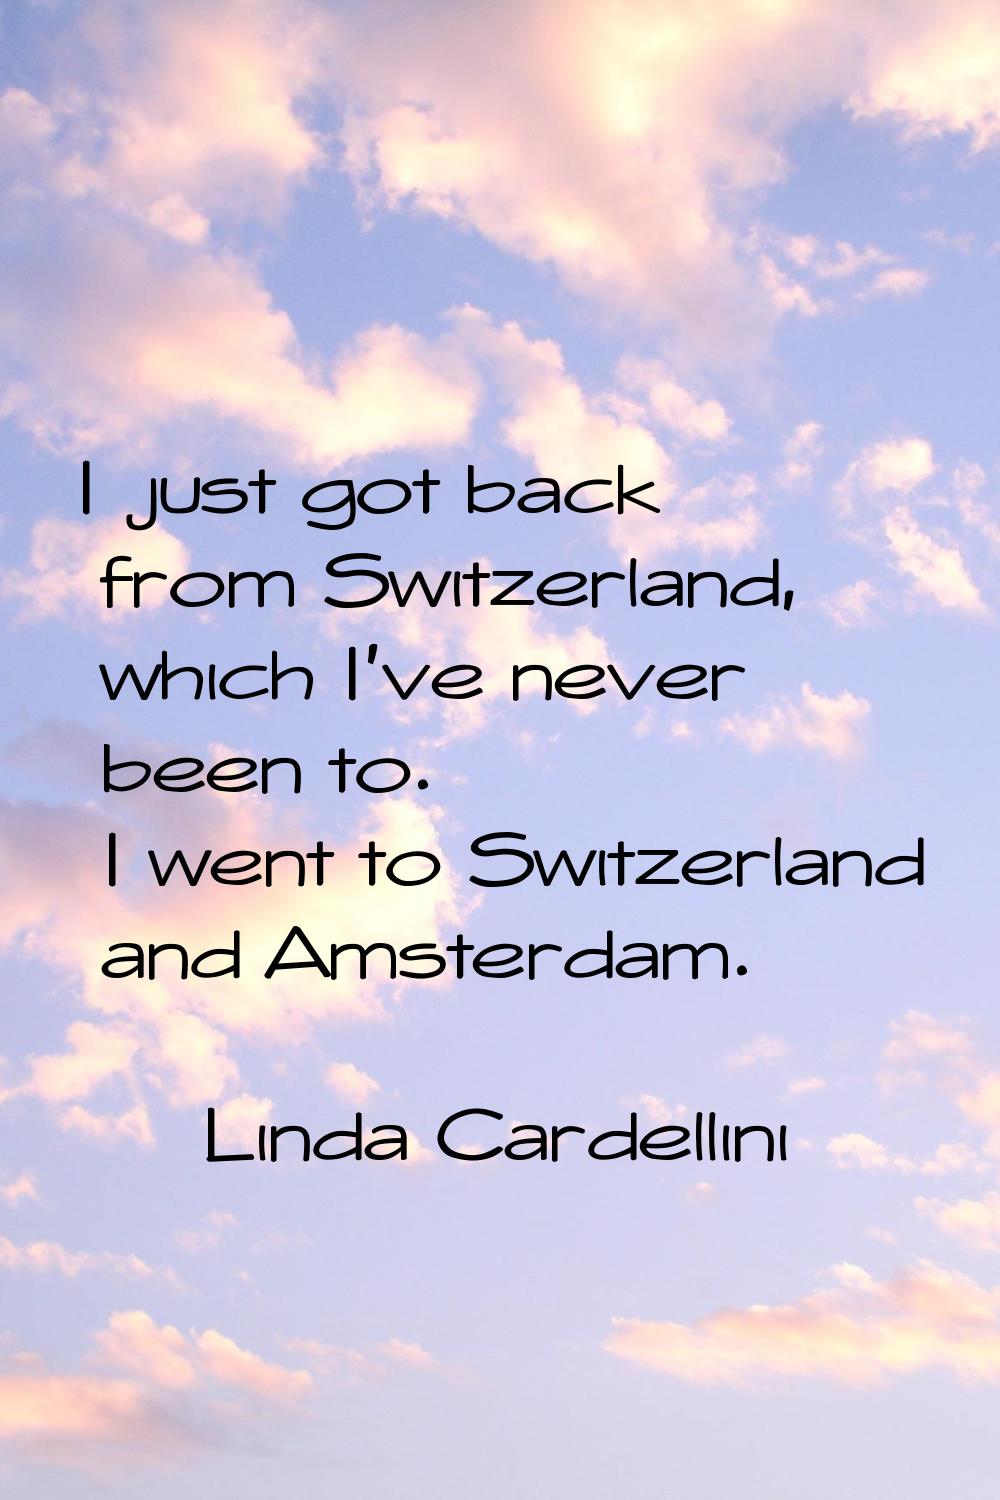 I just got back from Switzerland, which I've never been to. I went to Switzerland and Amsterdam.